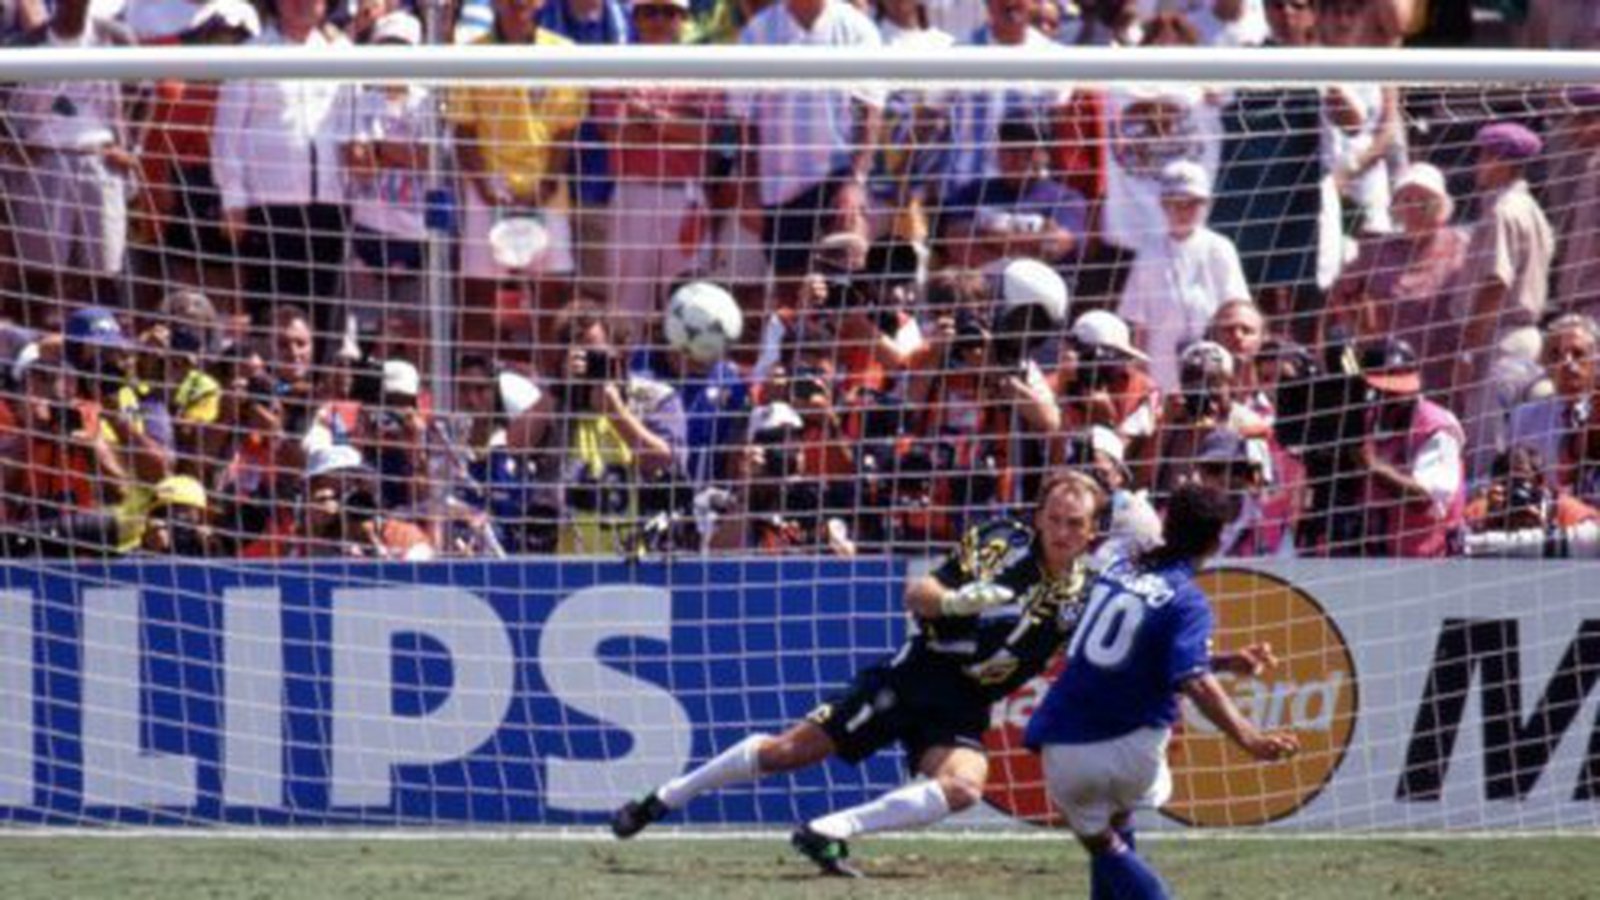 Germany in World Cup penalty shoot-outs: Every kick in history analysed, Football News